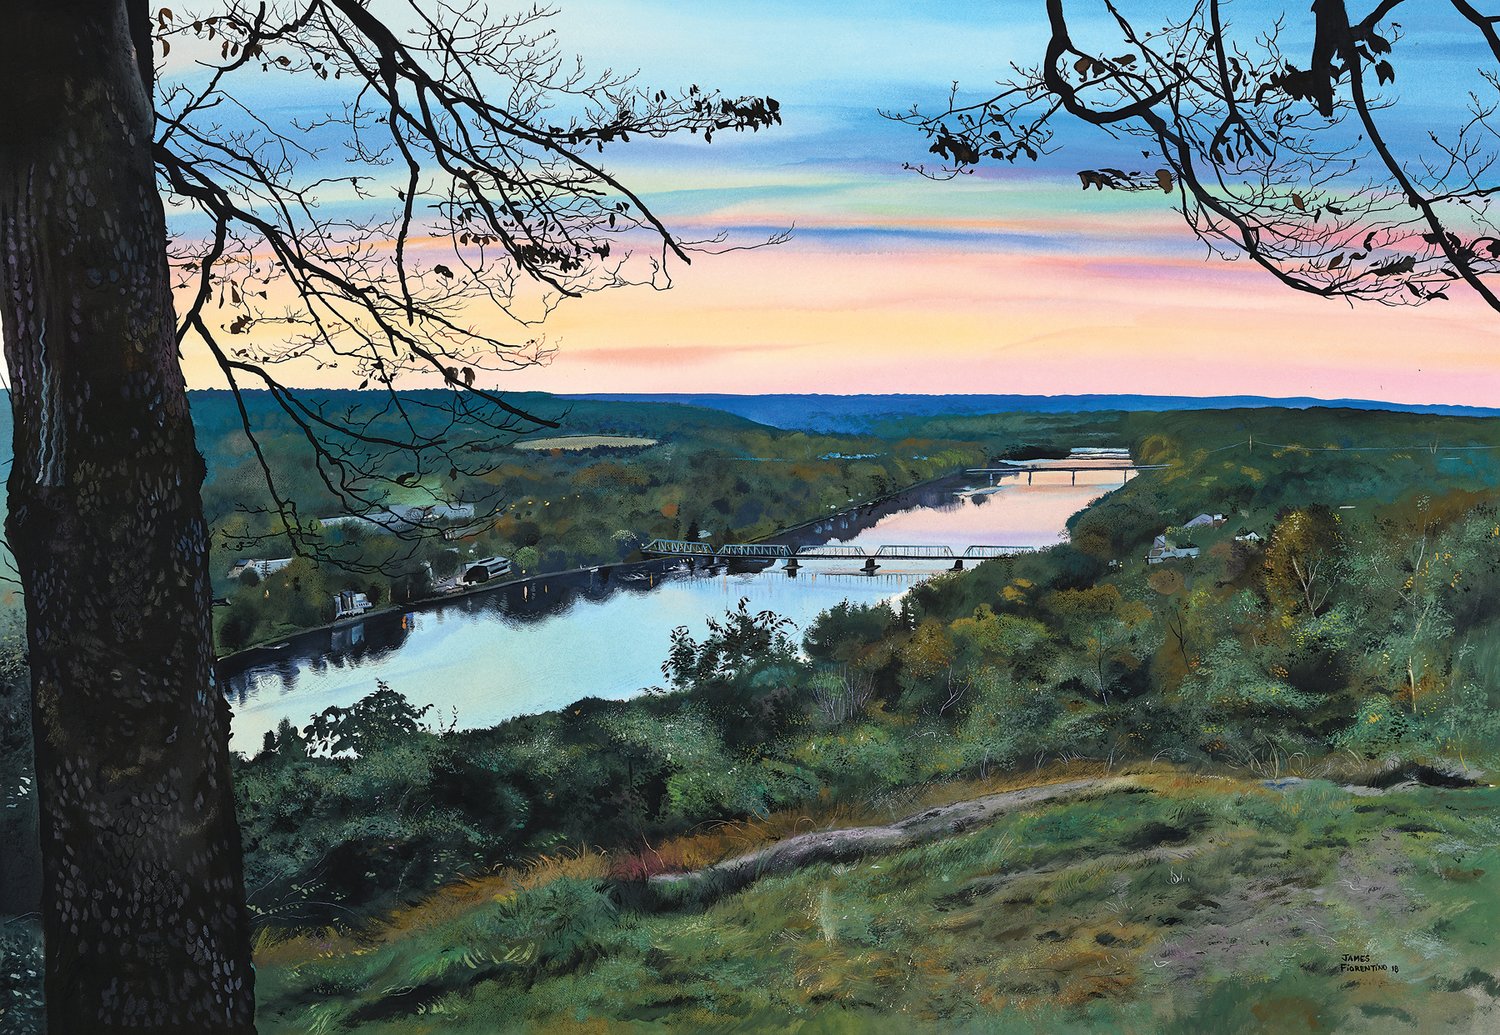 “Goat Hill Overlook” in Lambertville, N.J., is by James Fiorentino.